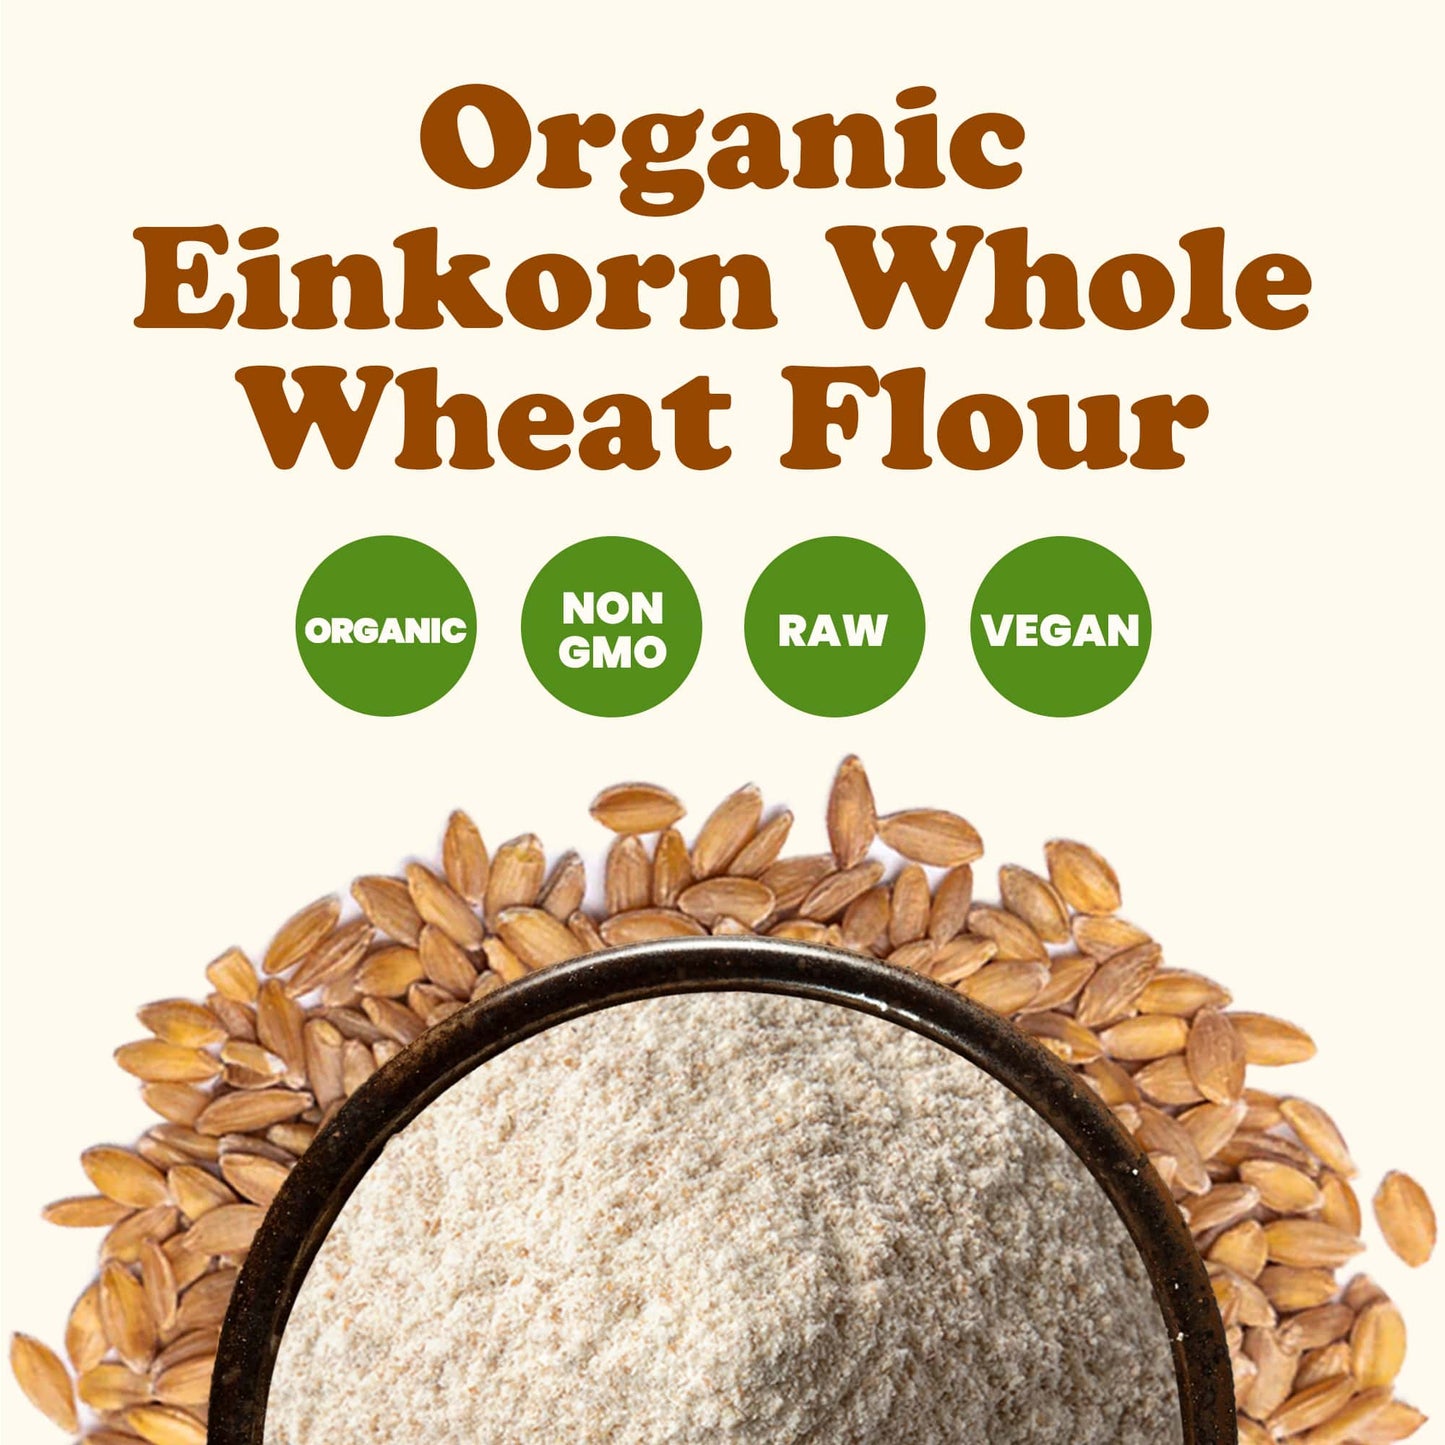 Organic Einkorn Whole Wheat Flour – Finely Milled Non-GMO Ancient Whole Grain Farro Piccolo. Good Source of Protein, Fiber, and Vitamins. Low-glycemic Index. Great for Baking. Kosher. Bulk